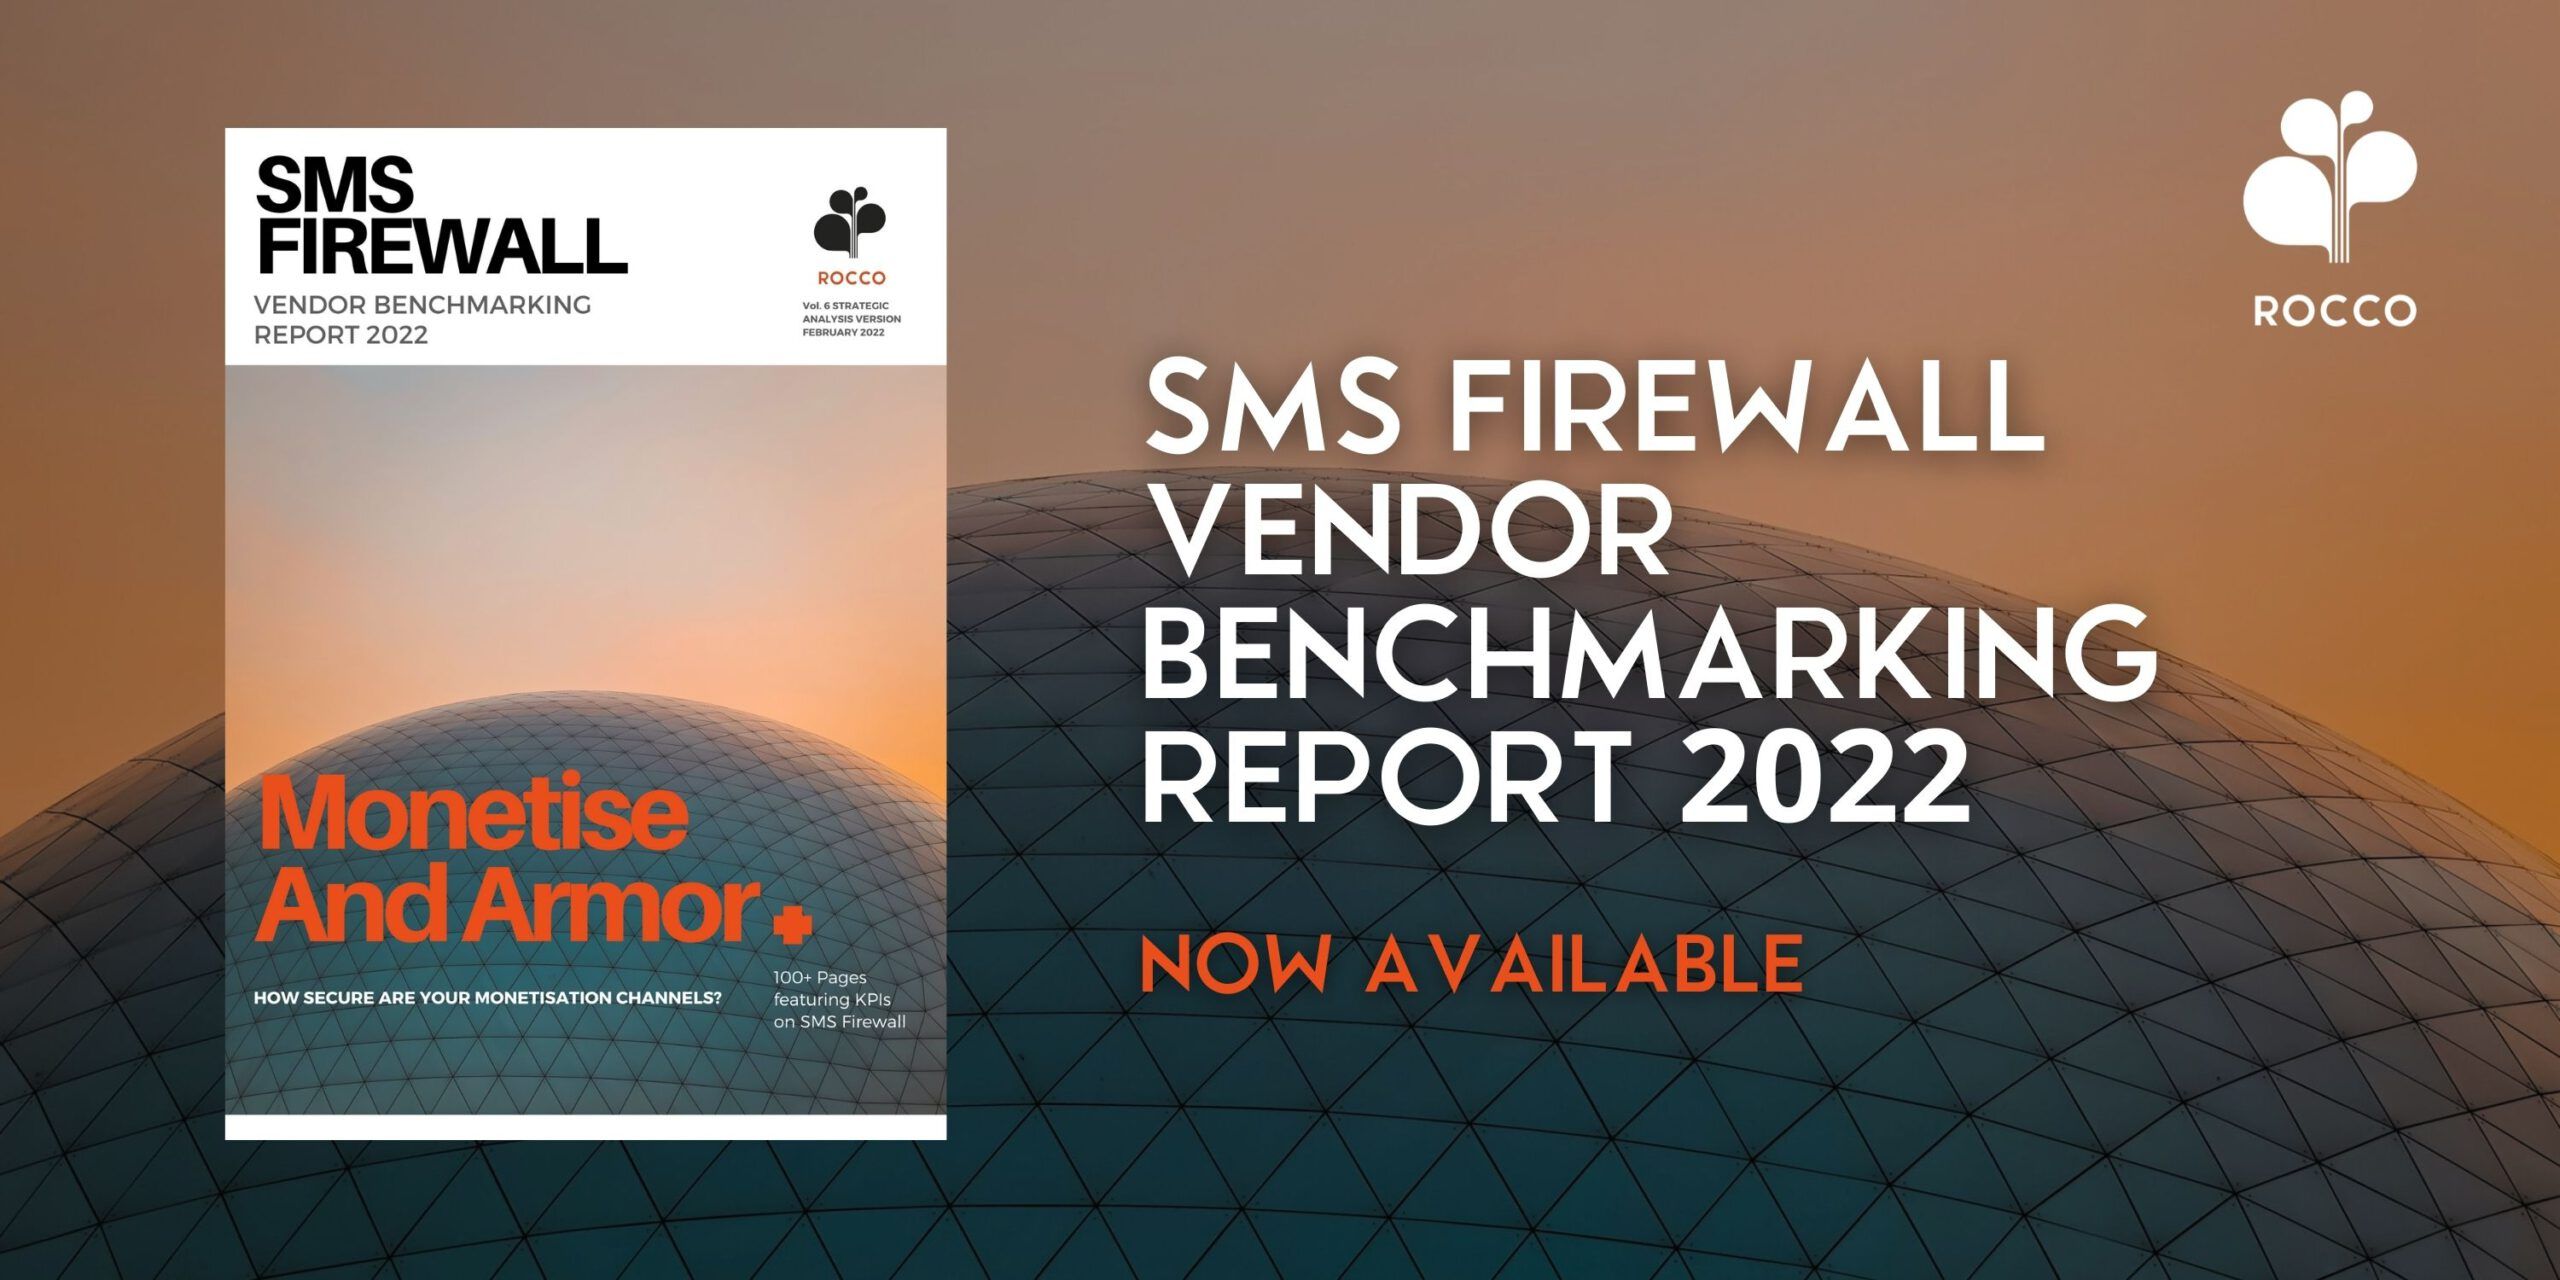 New SMS Firewall Vendor Benchmarking Report from ROCCO